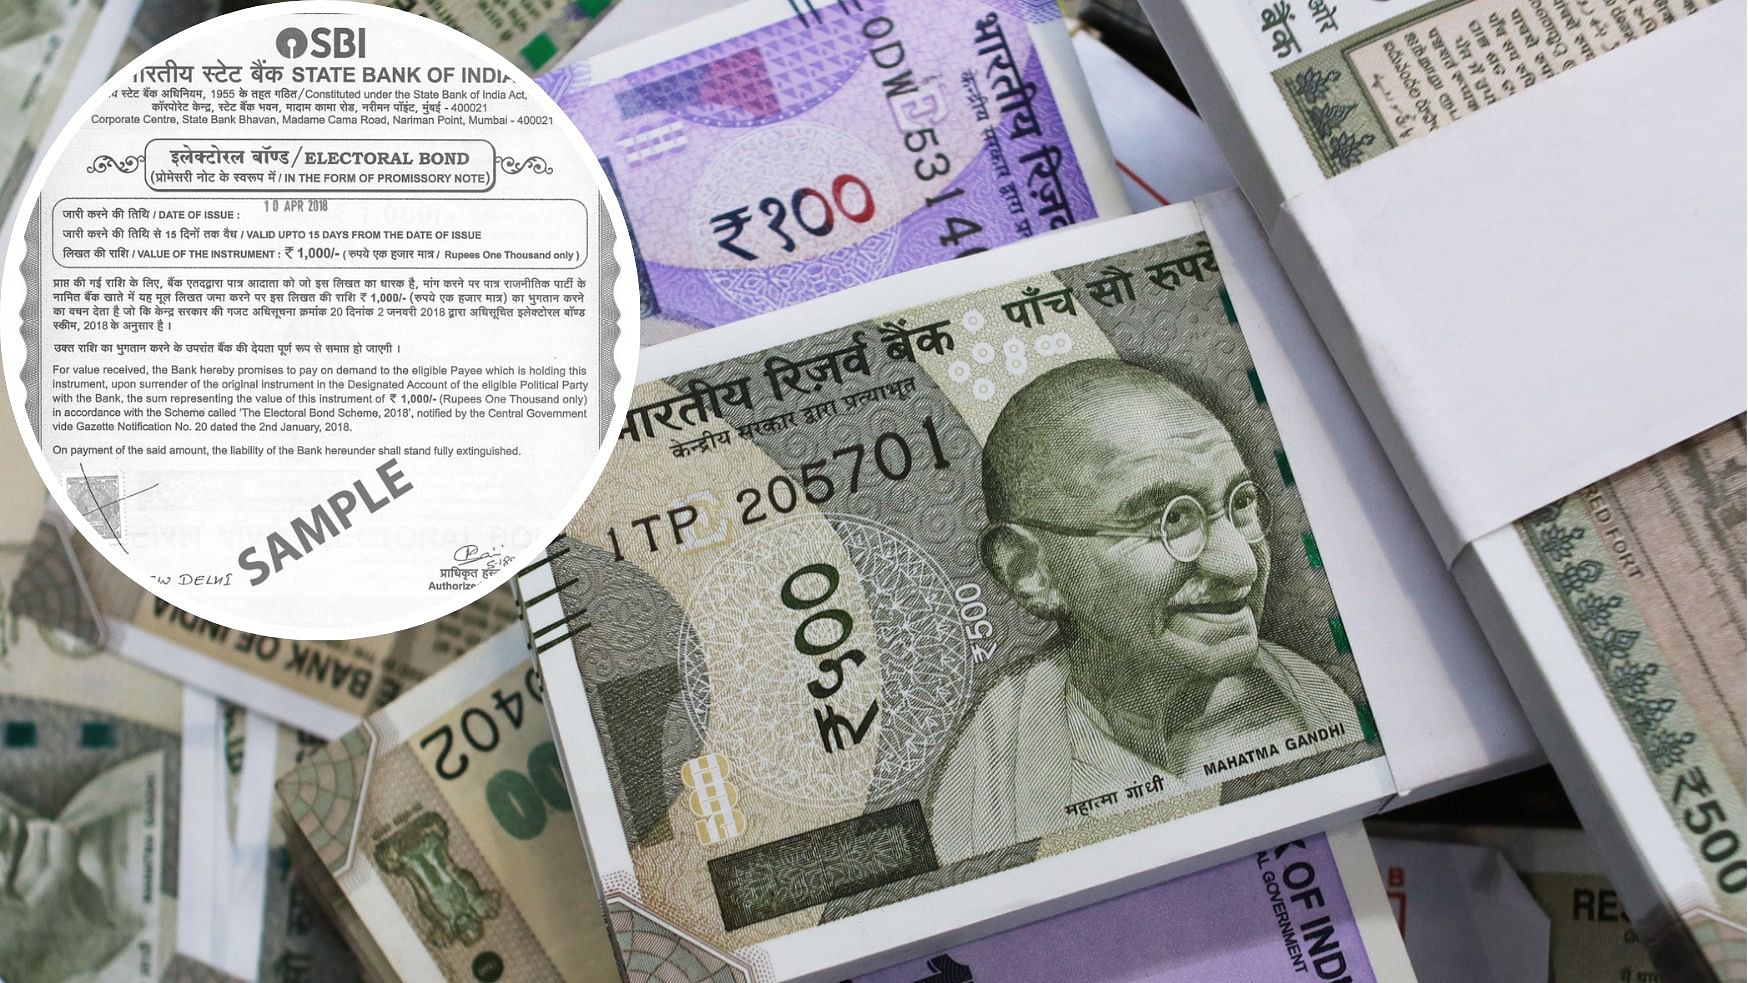 <div class="paragraphs"><p>Representative image showing a sample of electoral bonds along with 500 and 100 rupee notes.</p></div>